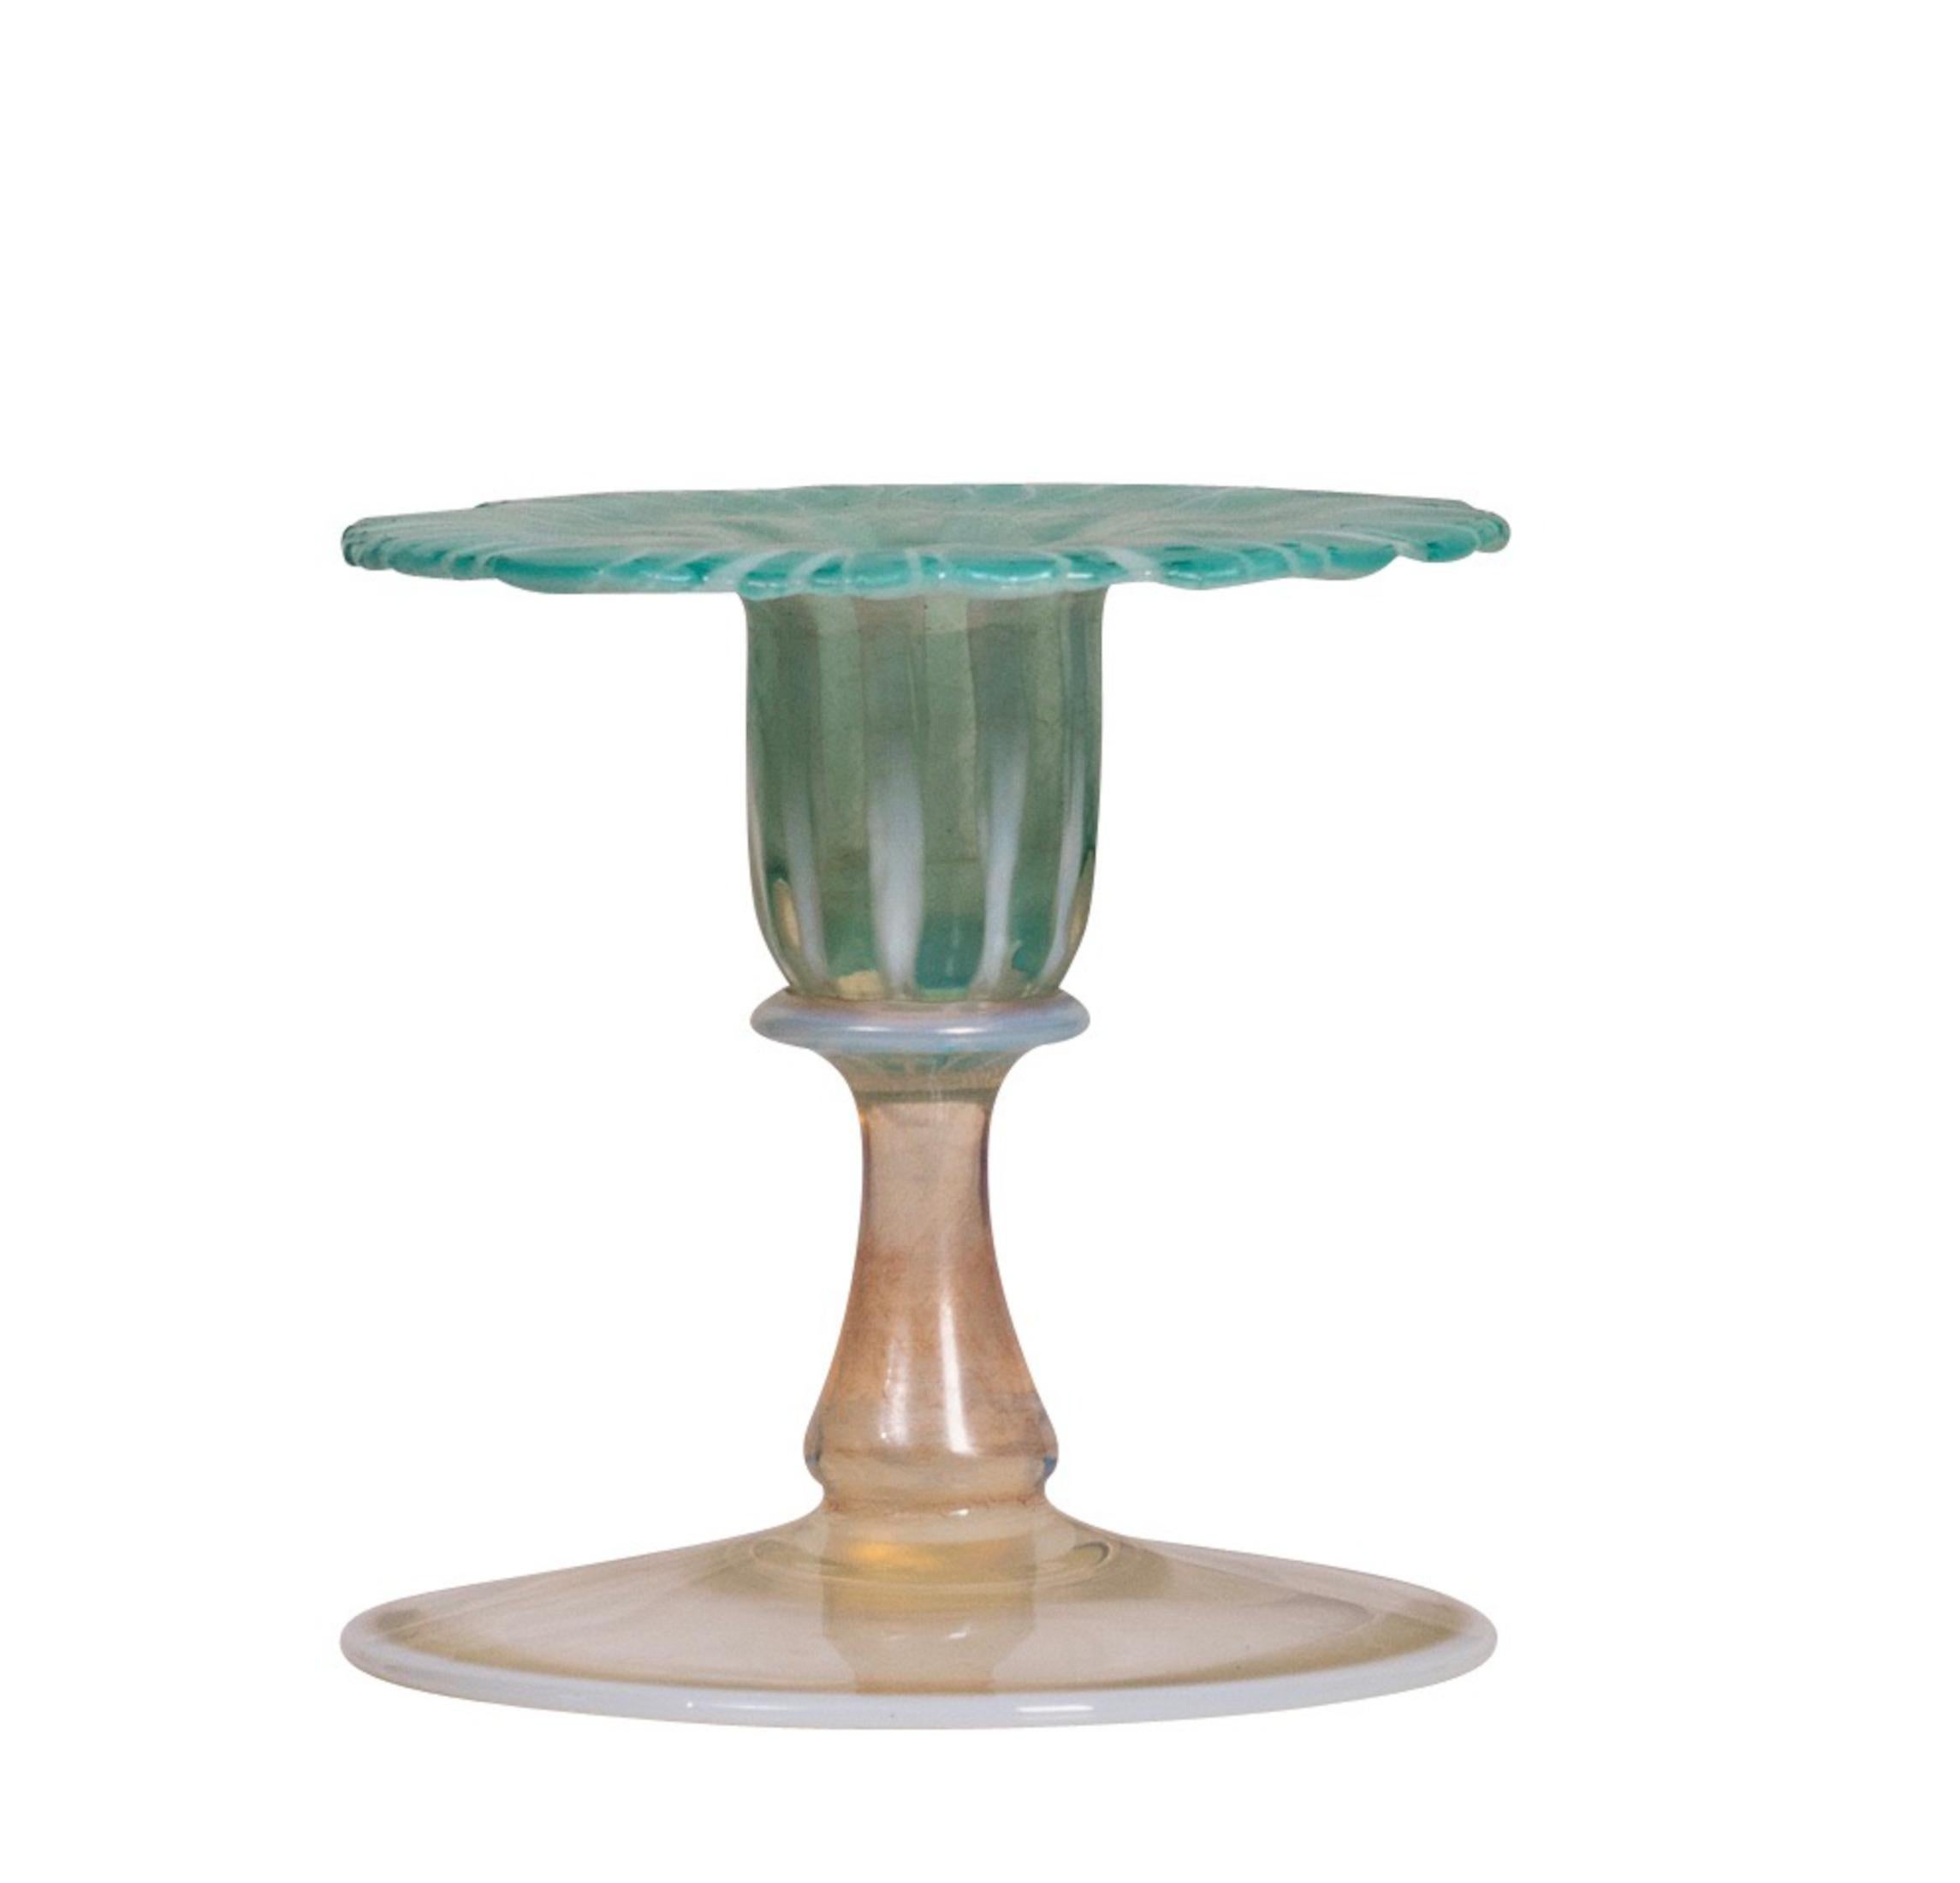 Tiffany Favrile Glass Morning Glory Candlestick circa 1918-1928 For Sale 3